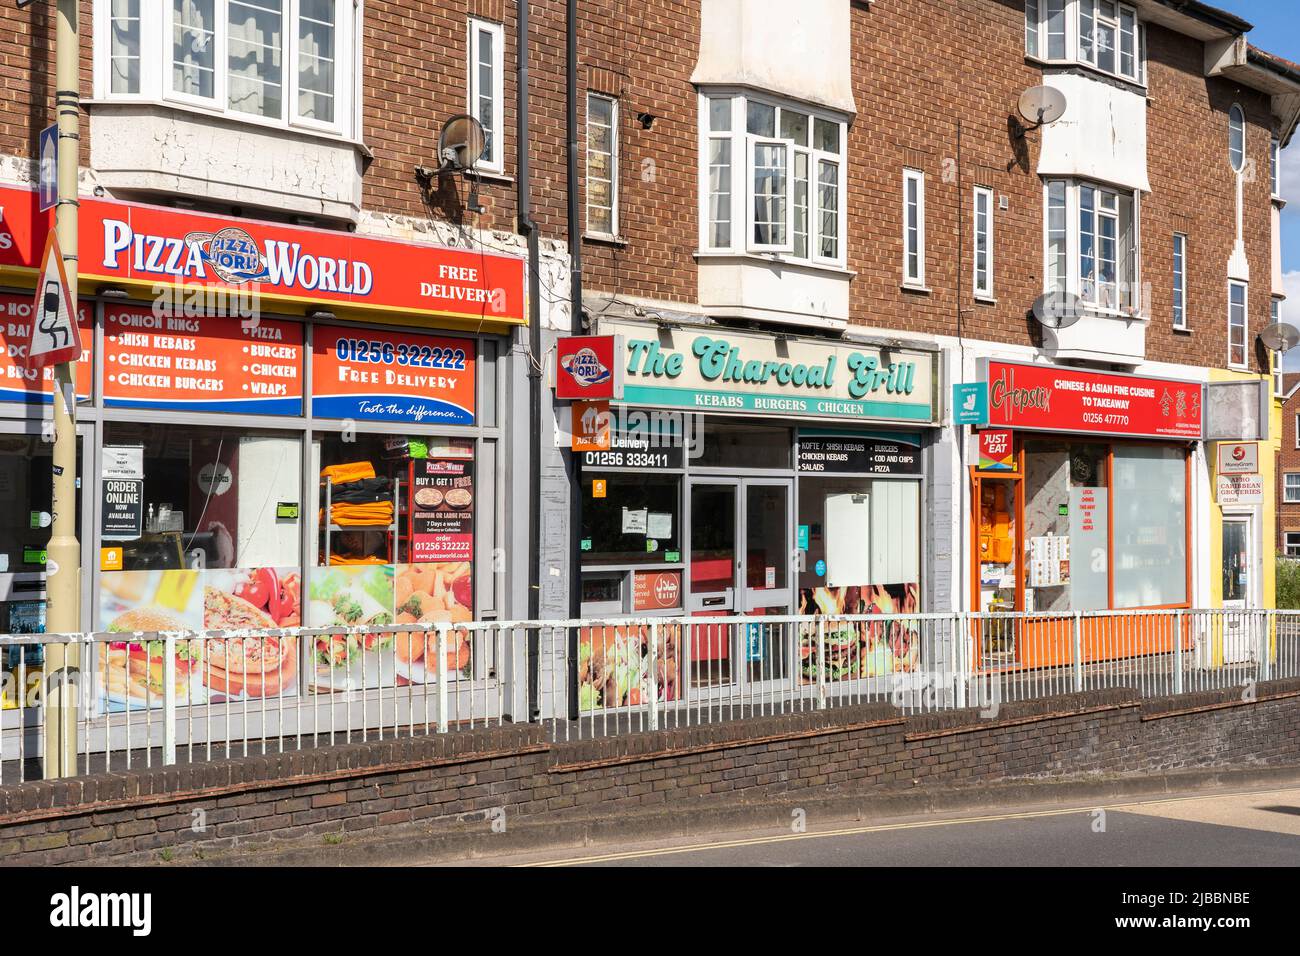 3 take away fast food shops - Pizza World, The Charcoal Grill and Chopstix on New Road, Basingstoke. Theme - obesity crisis, junk food Stock Photo